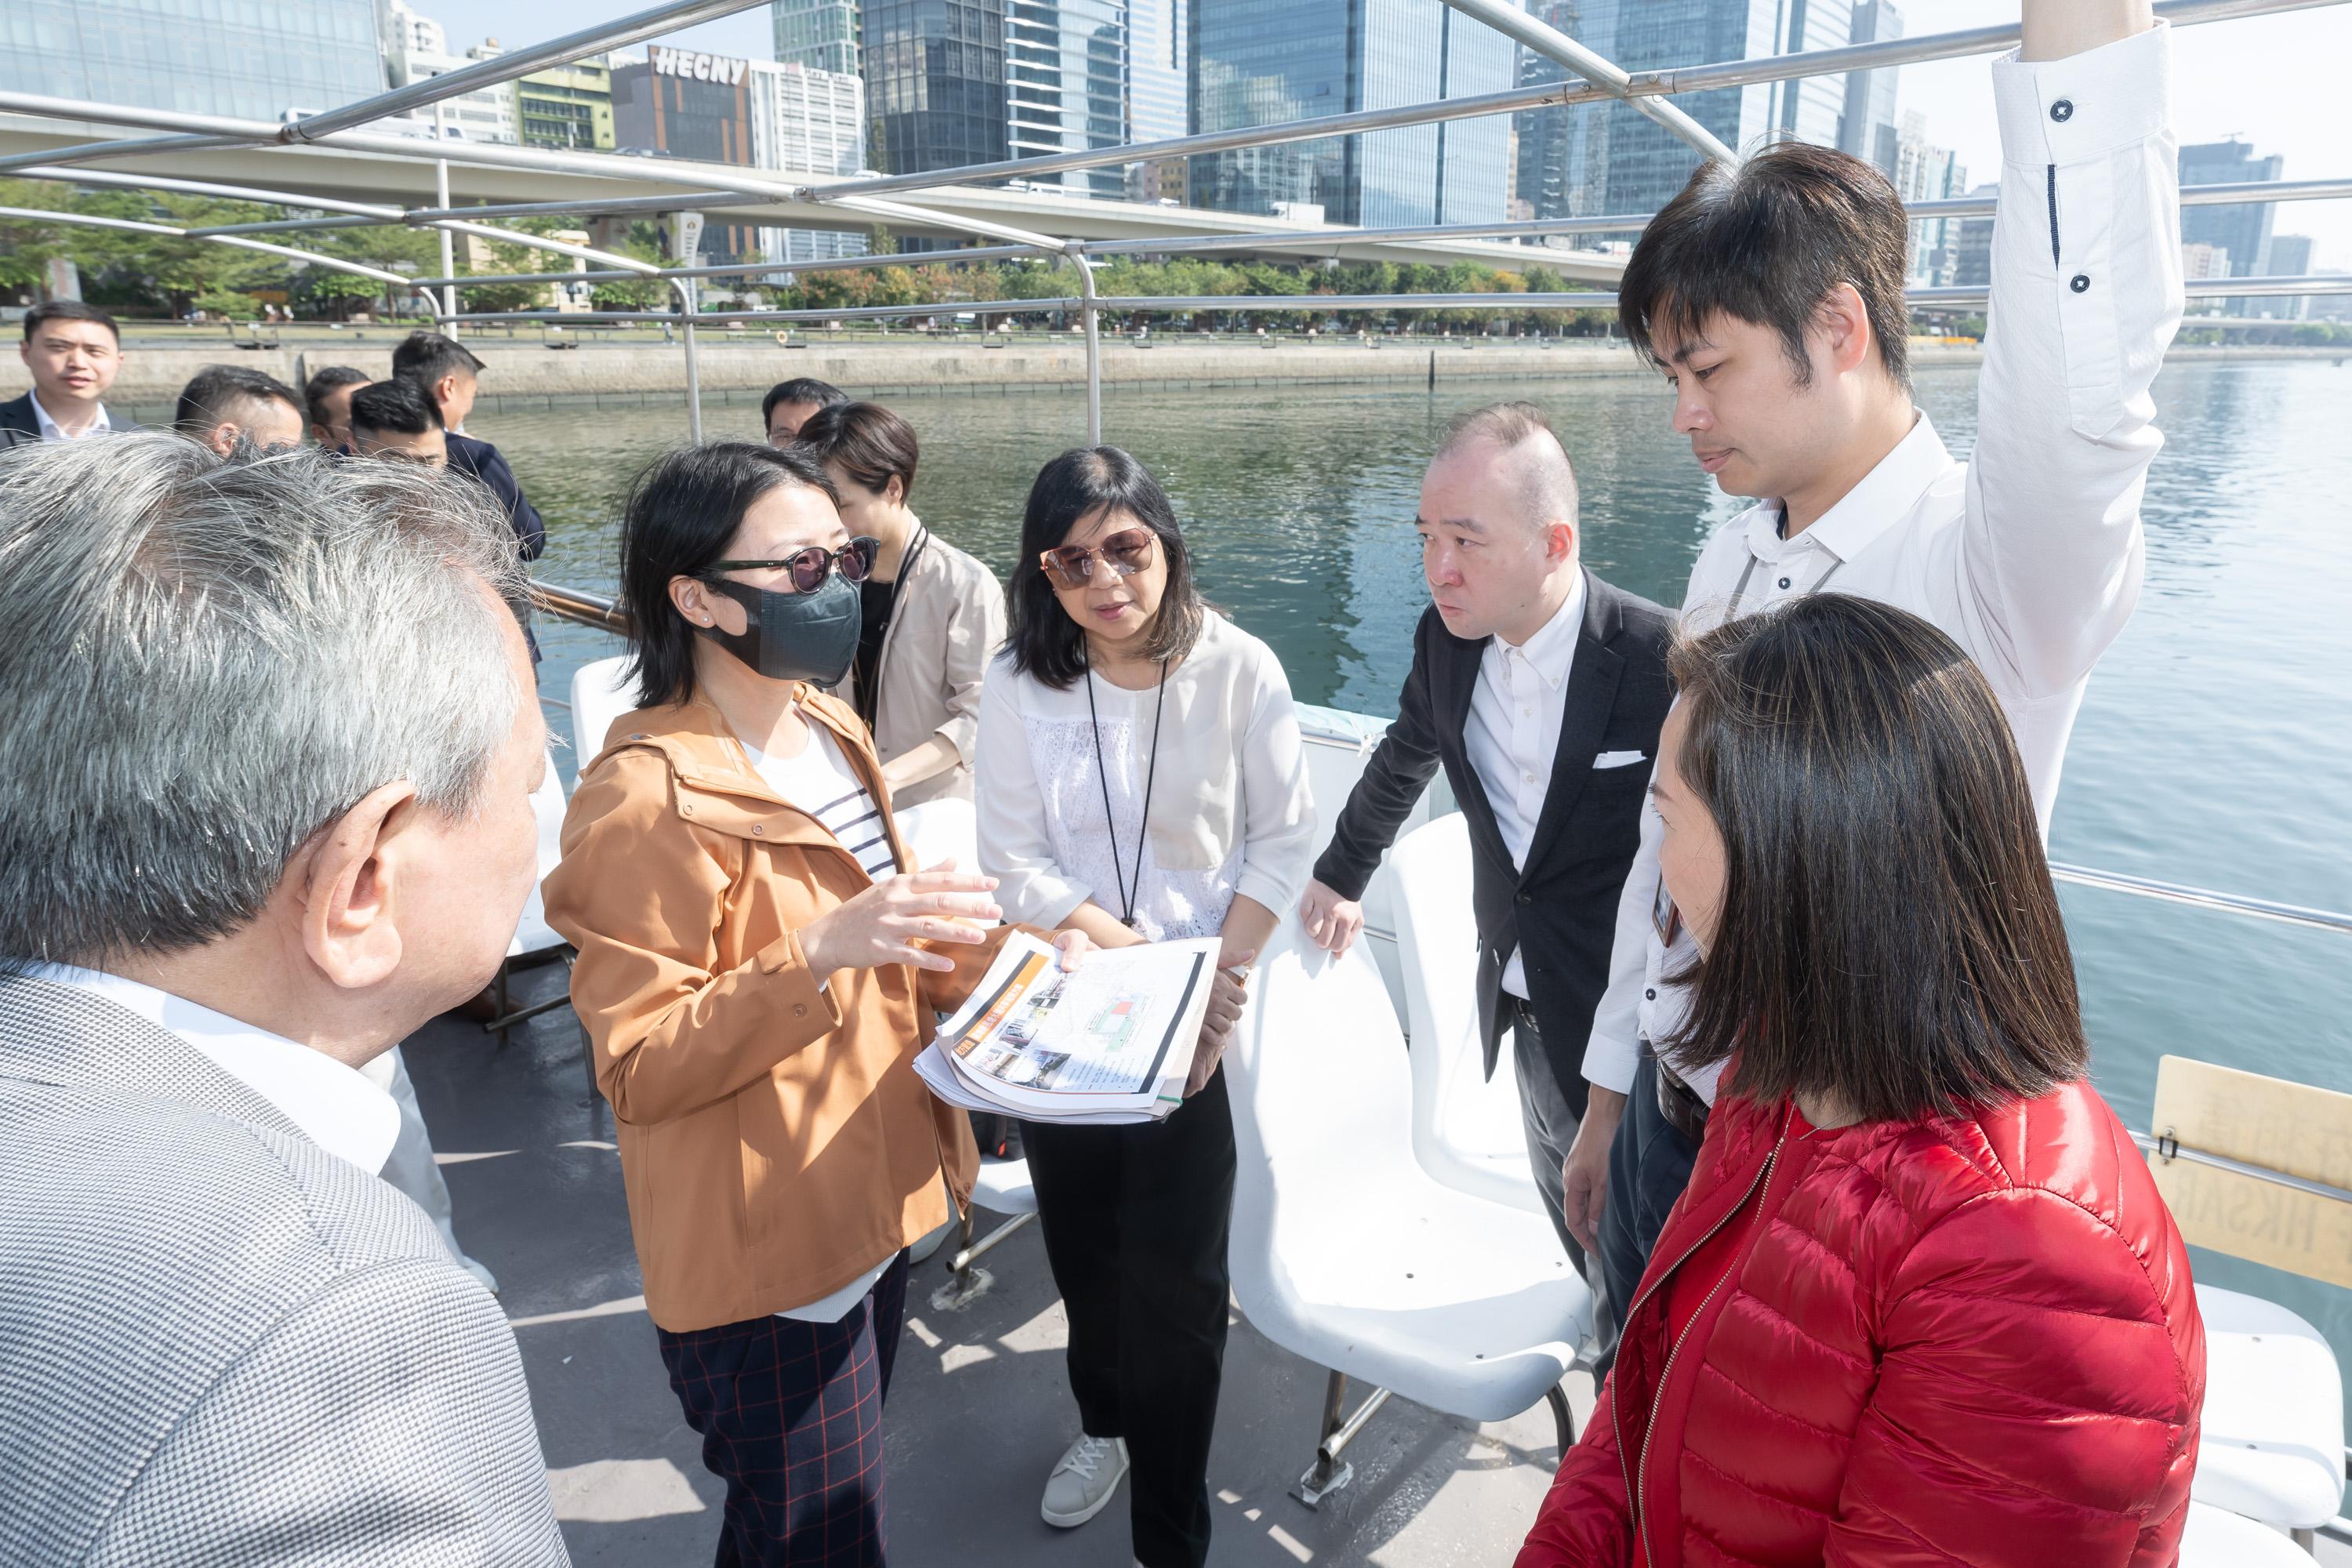 The Legislative Council (LegCo) Subcommittee to Study Matters Relating to Typhoon Shelters and Sheltered Anchorages conducts a site visit to the typhoon shelters at Aberdeen, Kwun Tong and Yau Ma Tei today (December 5). Photo shows LegCo Members learning about the operation of the pilot scheme for the exclusive mooring of non-pleasure vessels within the Kwun Tong Typhoon Shelter.